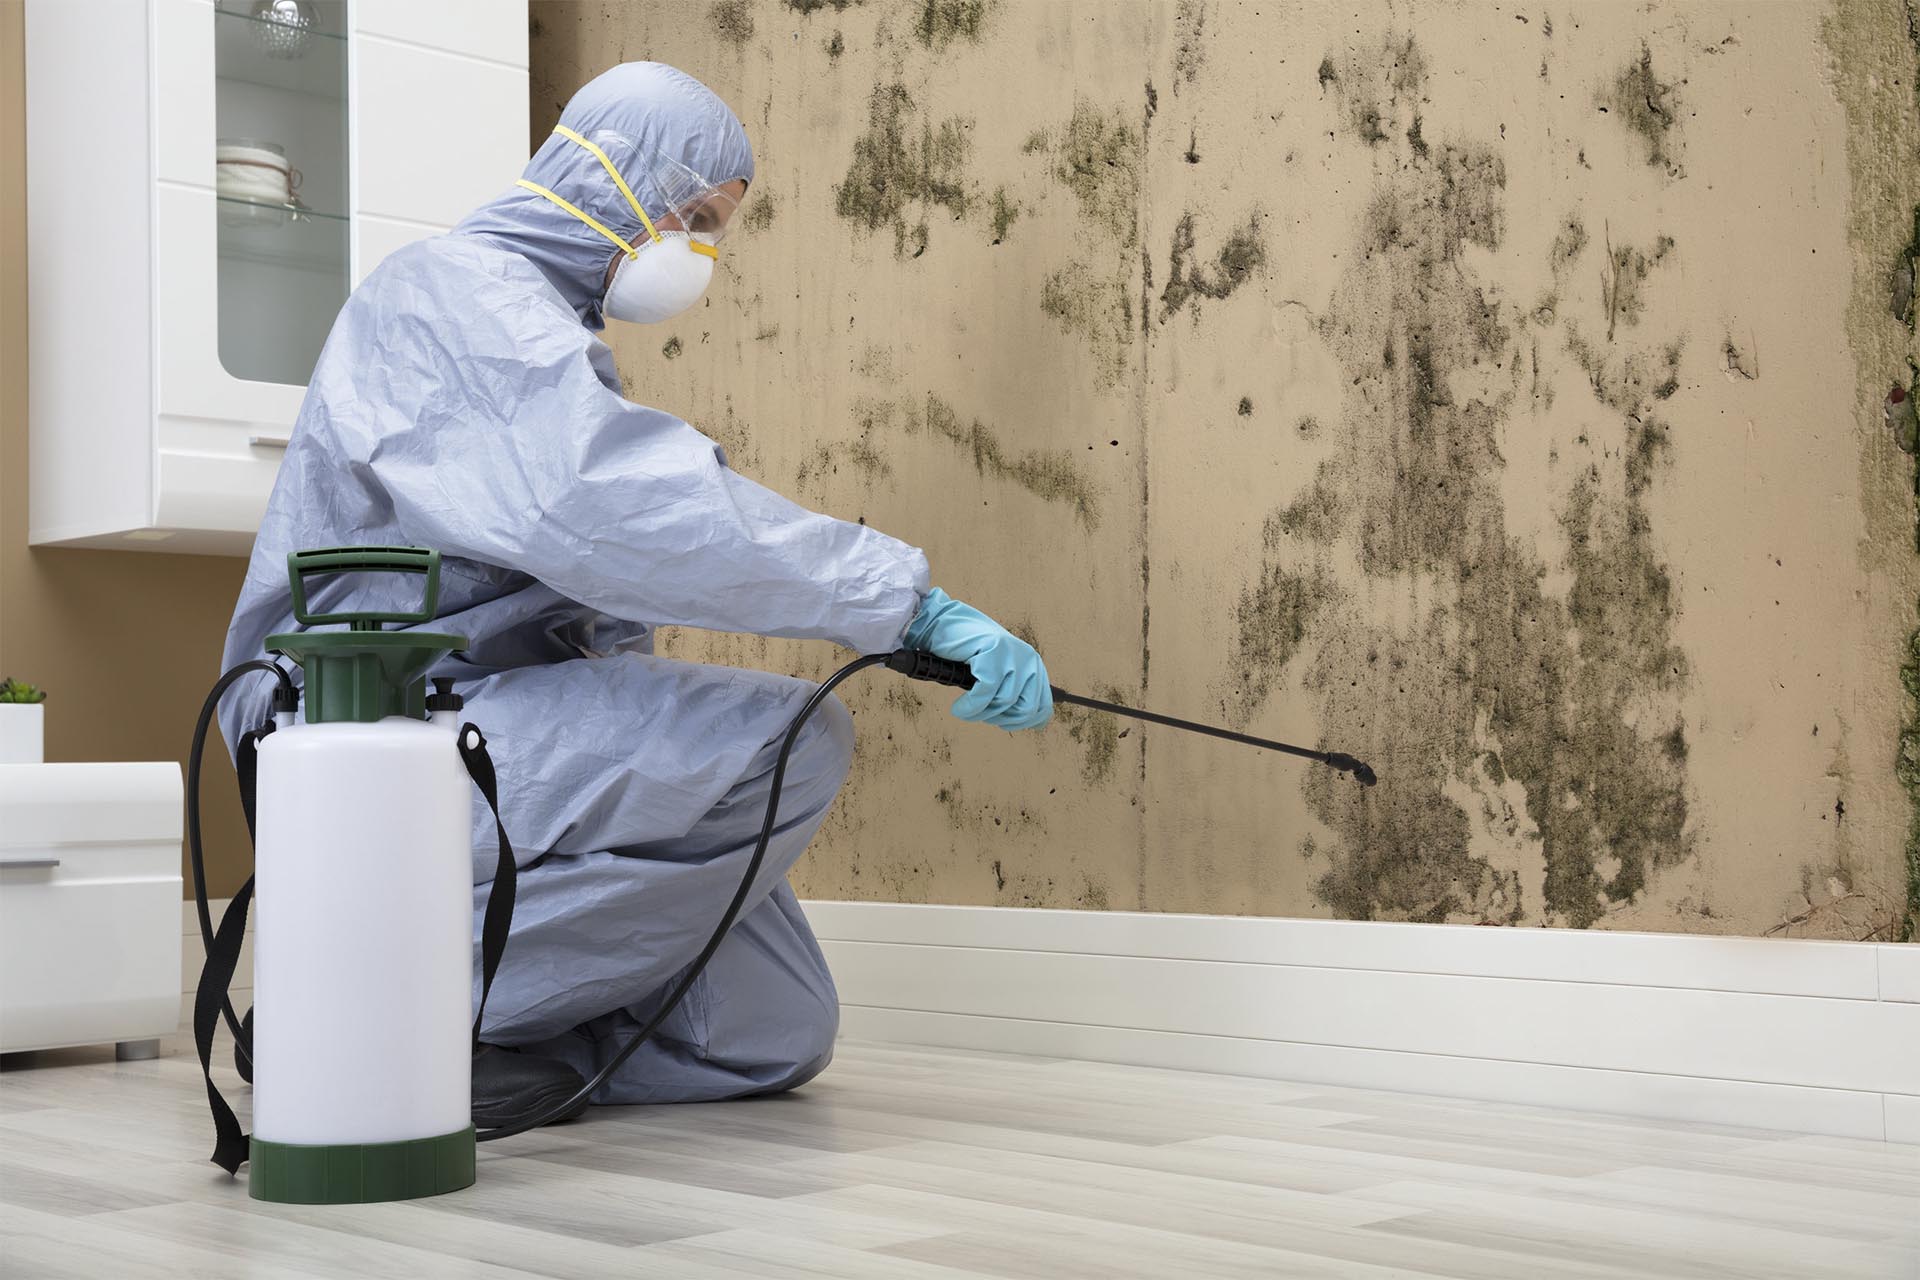 spraying mold killing solution on the wall.